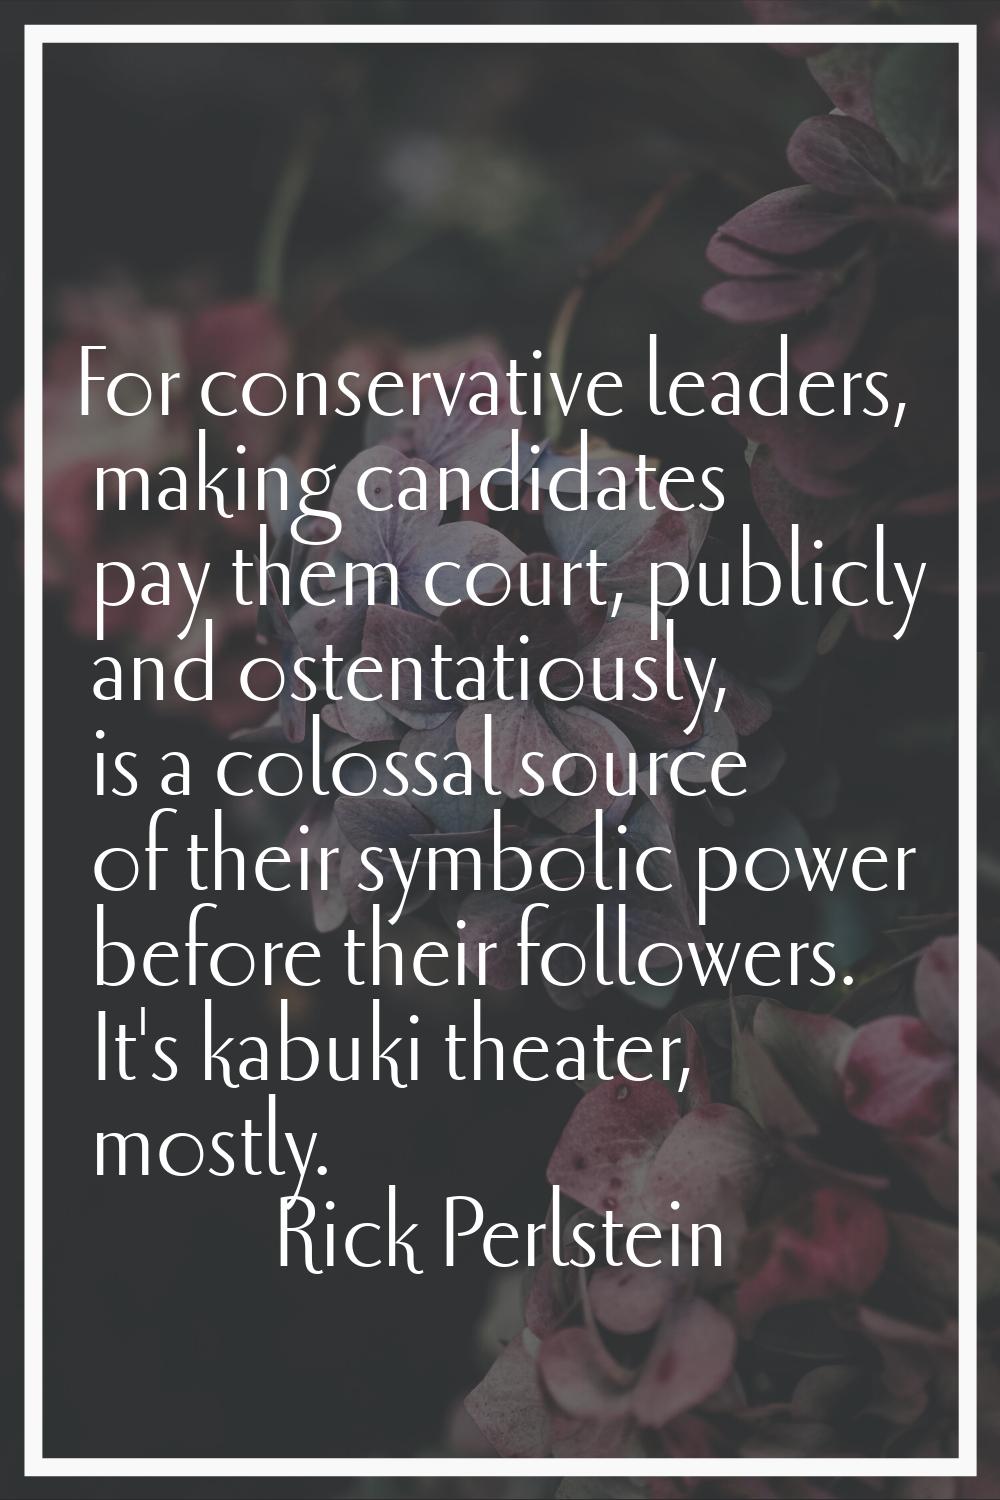 For conservative leaders, making candidates pay them court, publicly and ostentatiously, is a colos